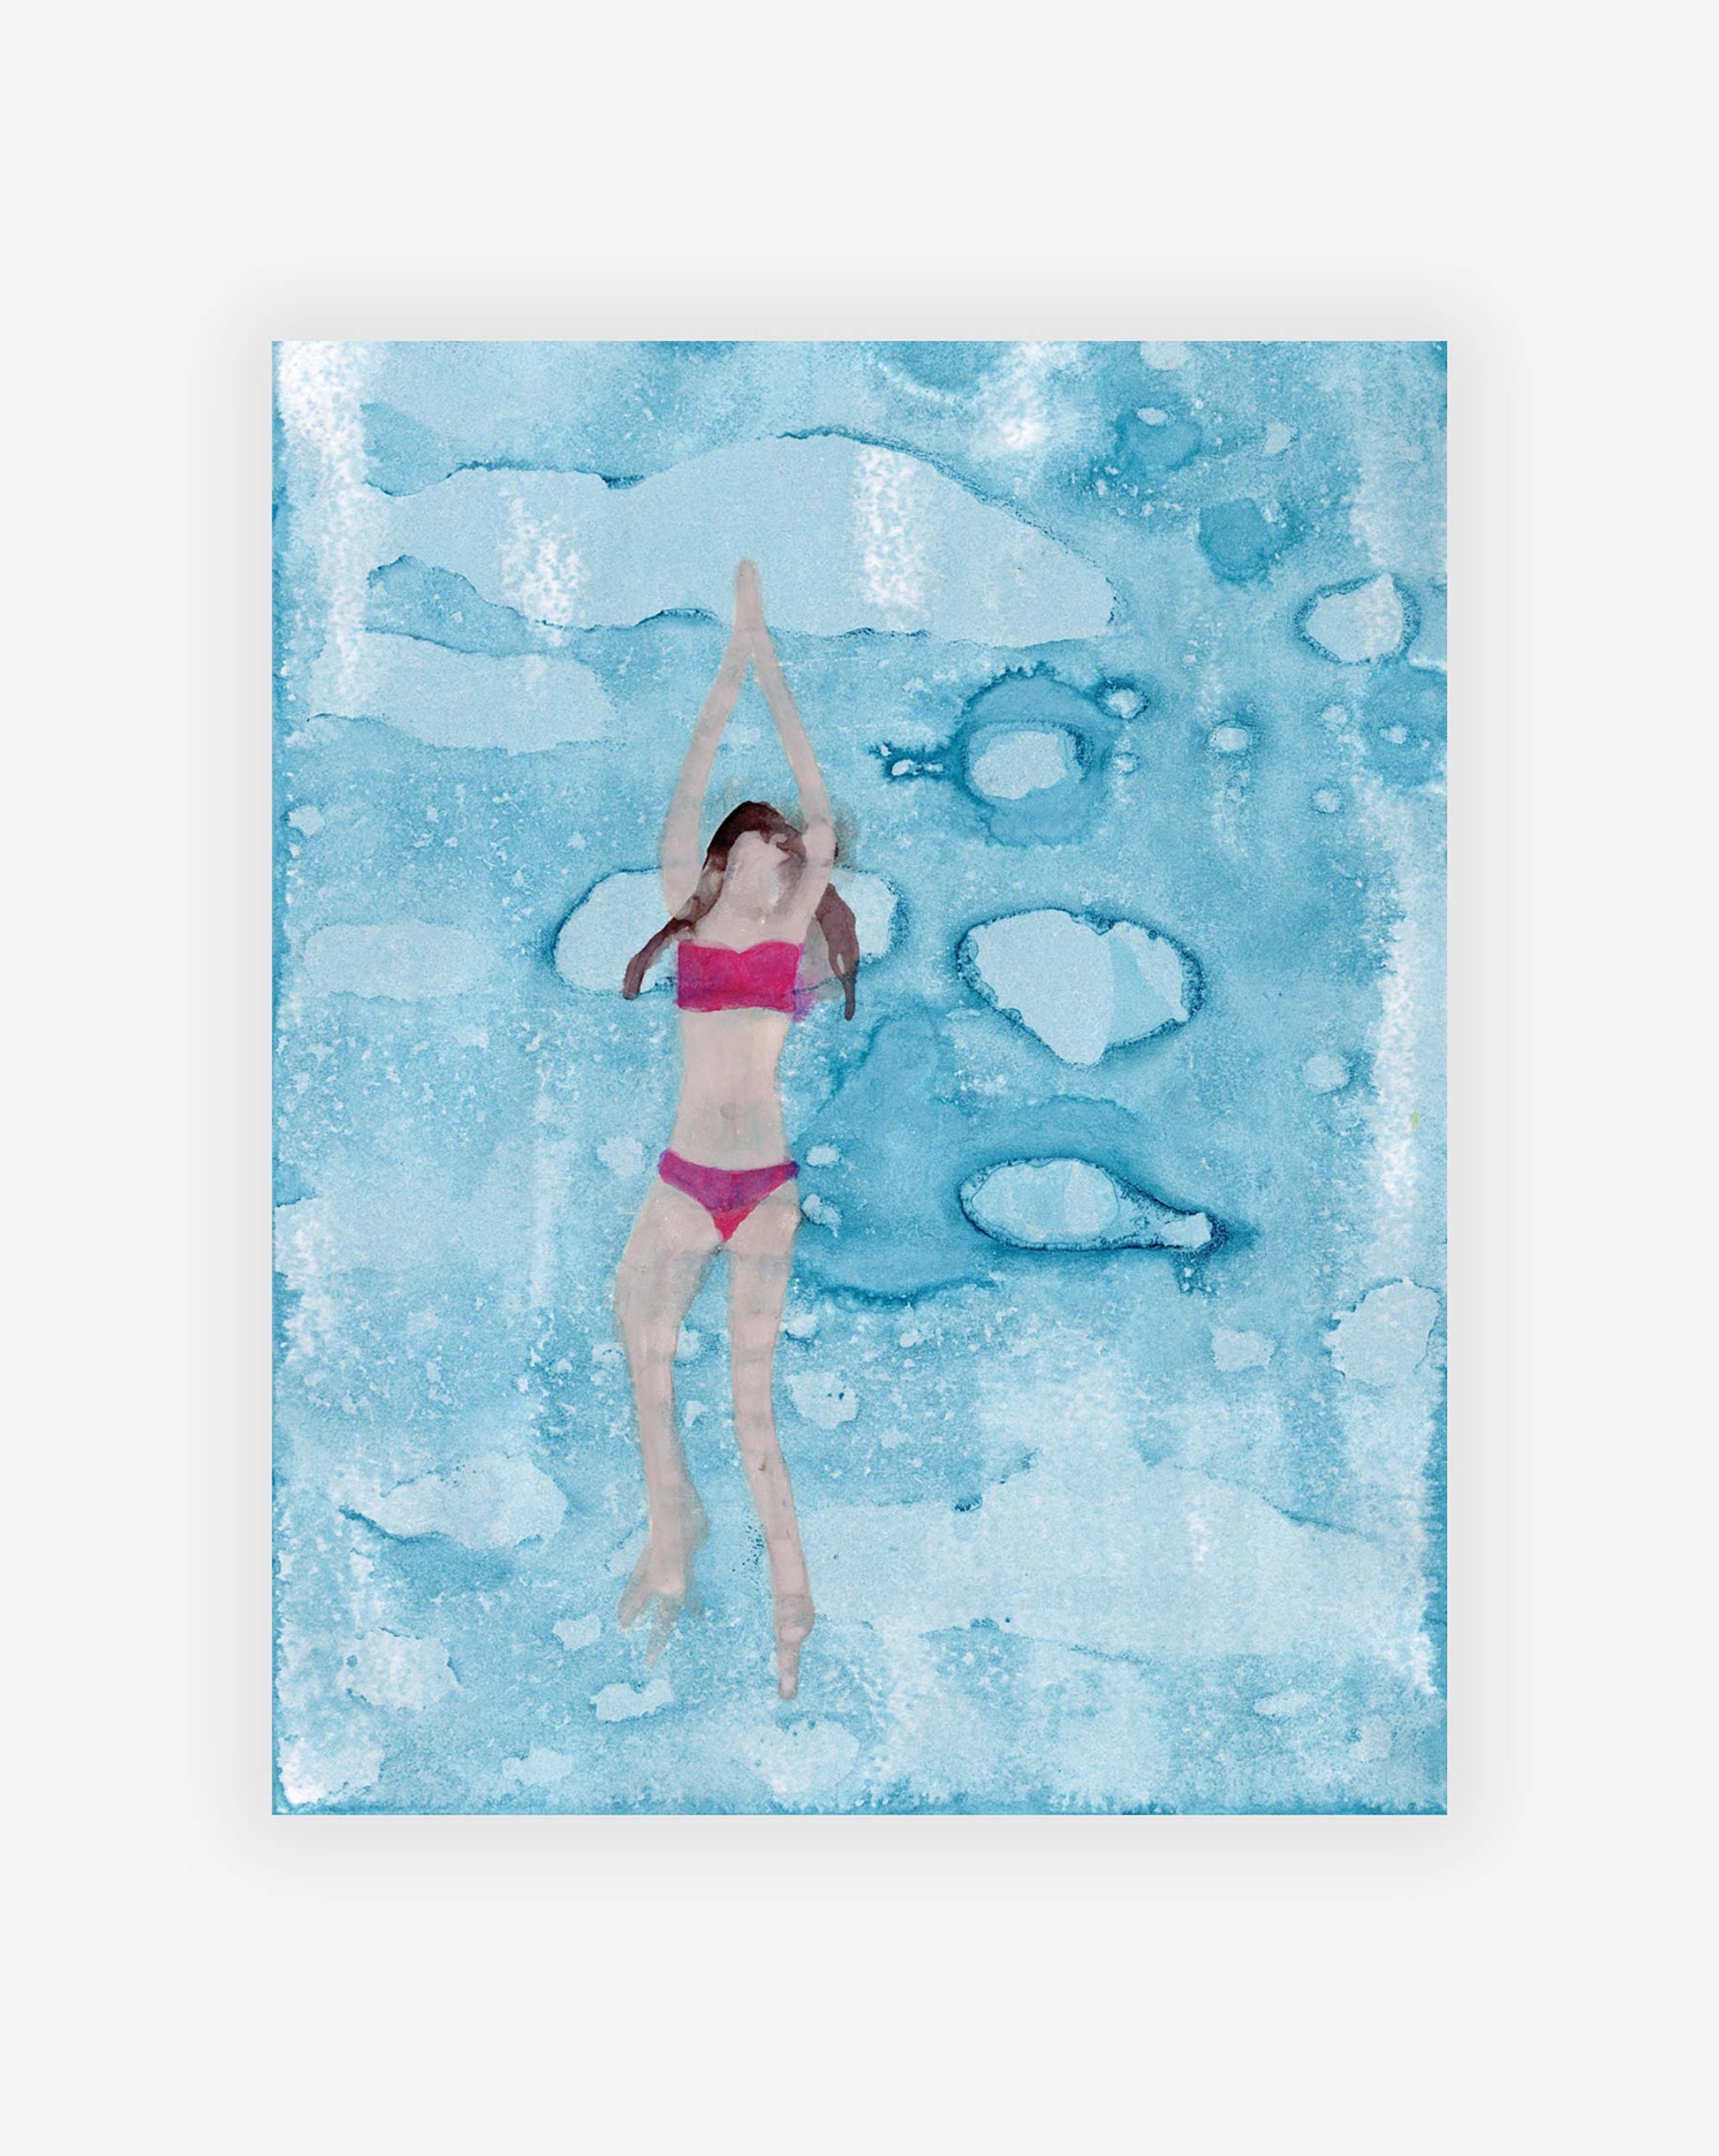 A painting by Eskayel founder and artist Shanan Campanaro depicts a person wearing a red bikini swimming with outstretched arms, set against a mesmerizing blue and white abstract background. This piece is part of her Back Float Print collection.